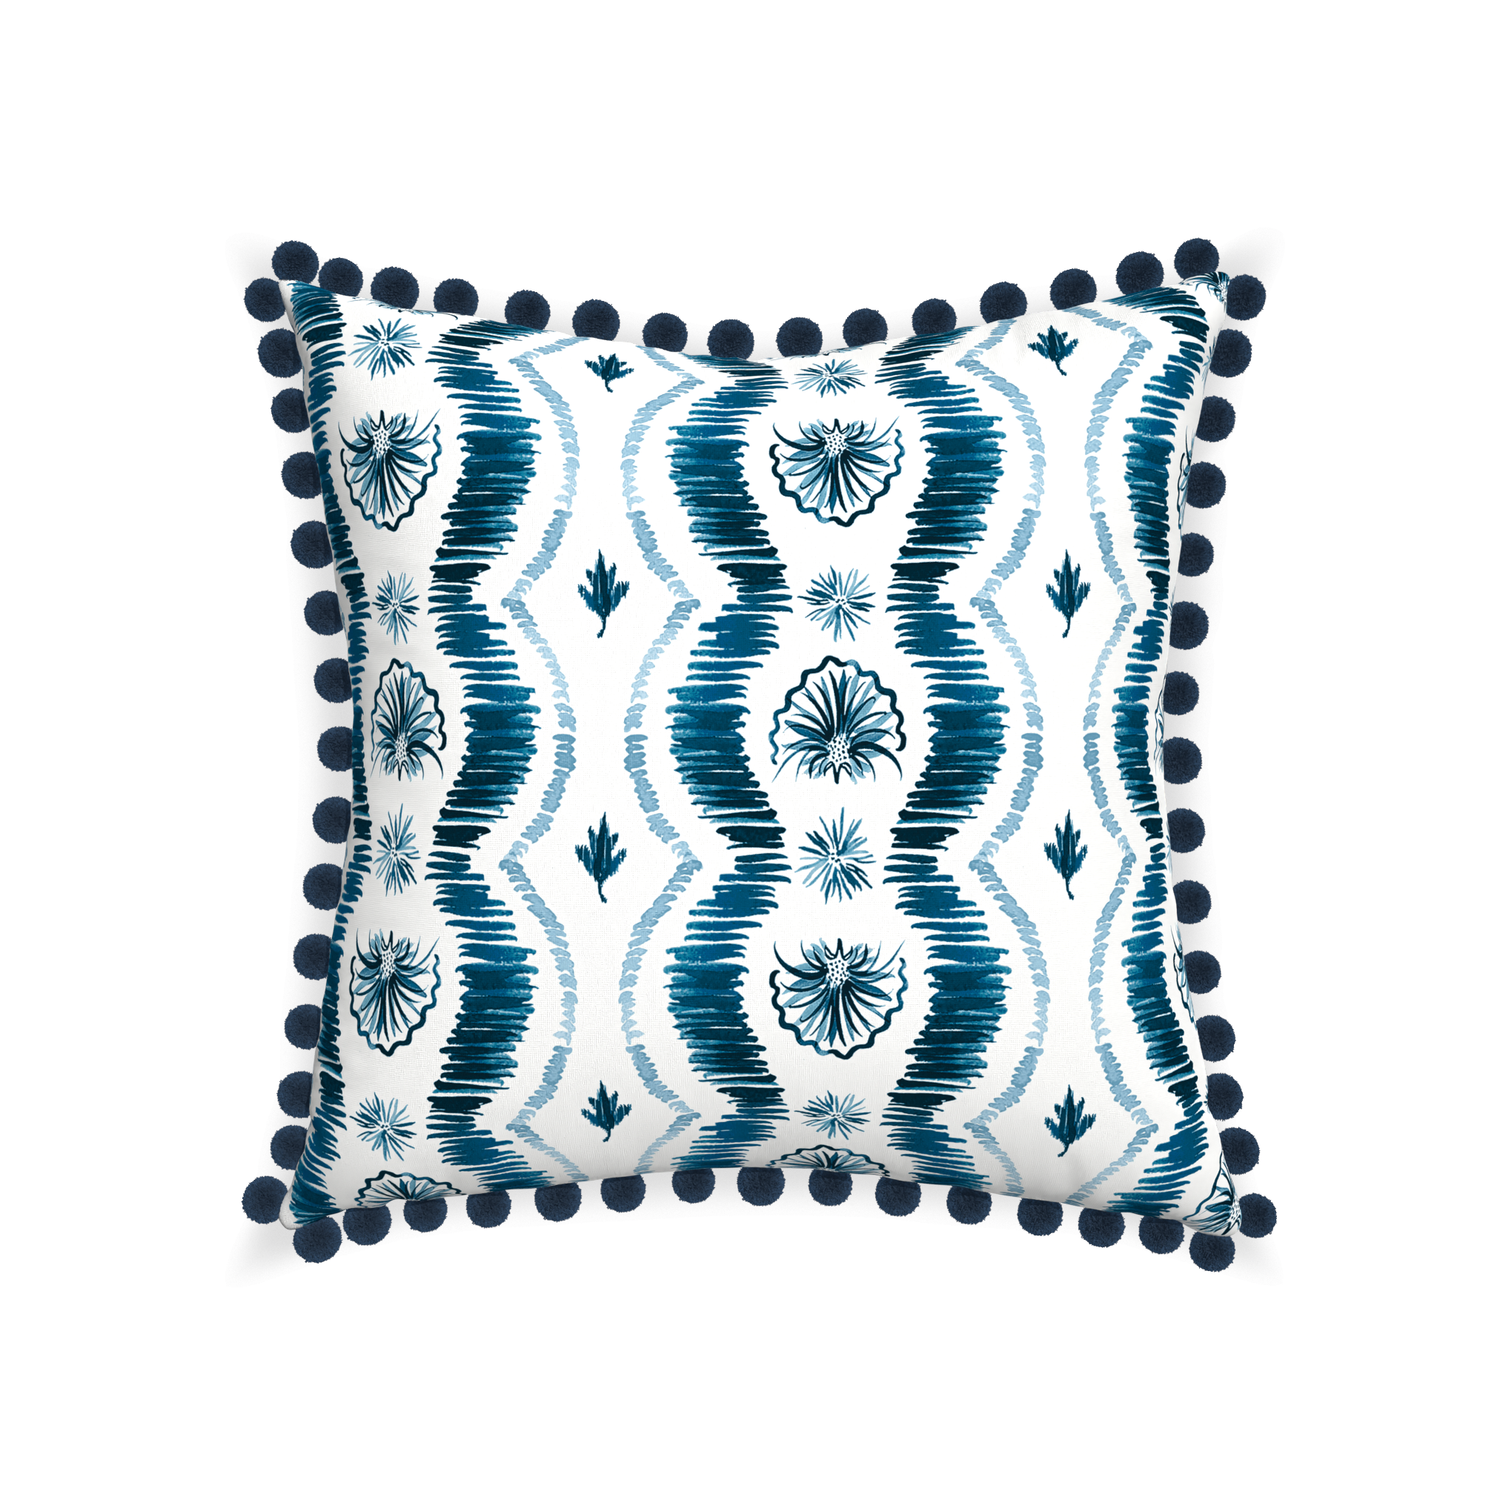 22-square alice custom blue ikatpillow with c on white background